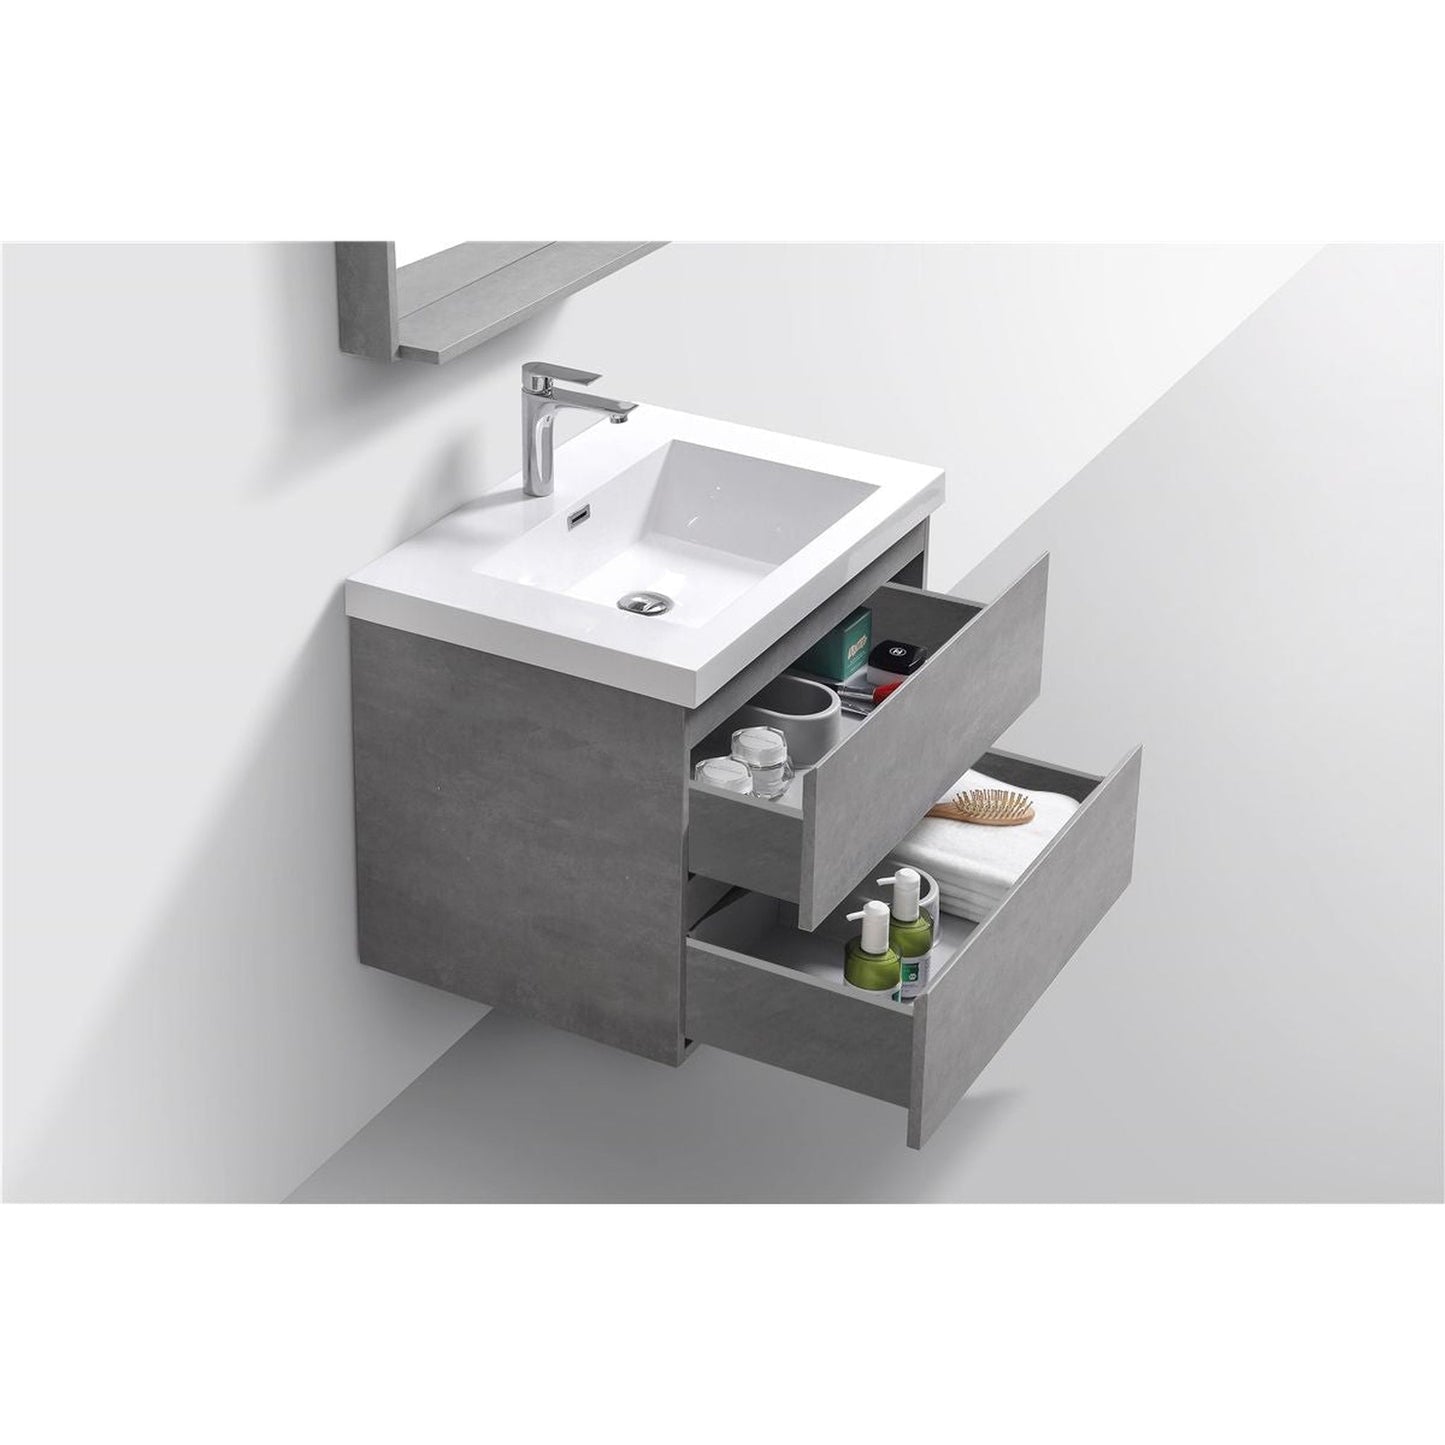 Moreno Bath Bohemia Lina 30" Cement Gray Wall-Mounted Vanity With Single Reinforced White Acrylic Sink